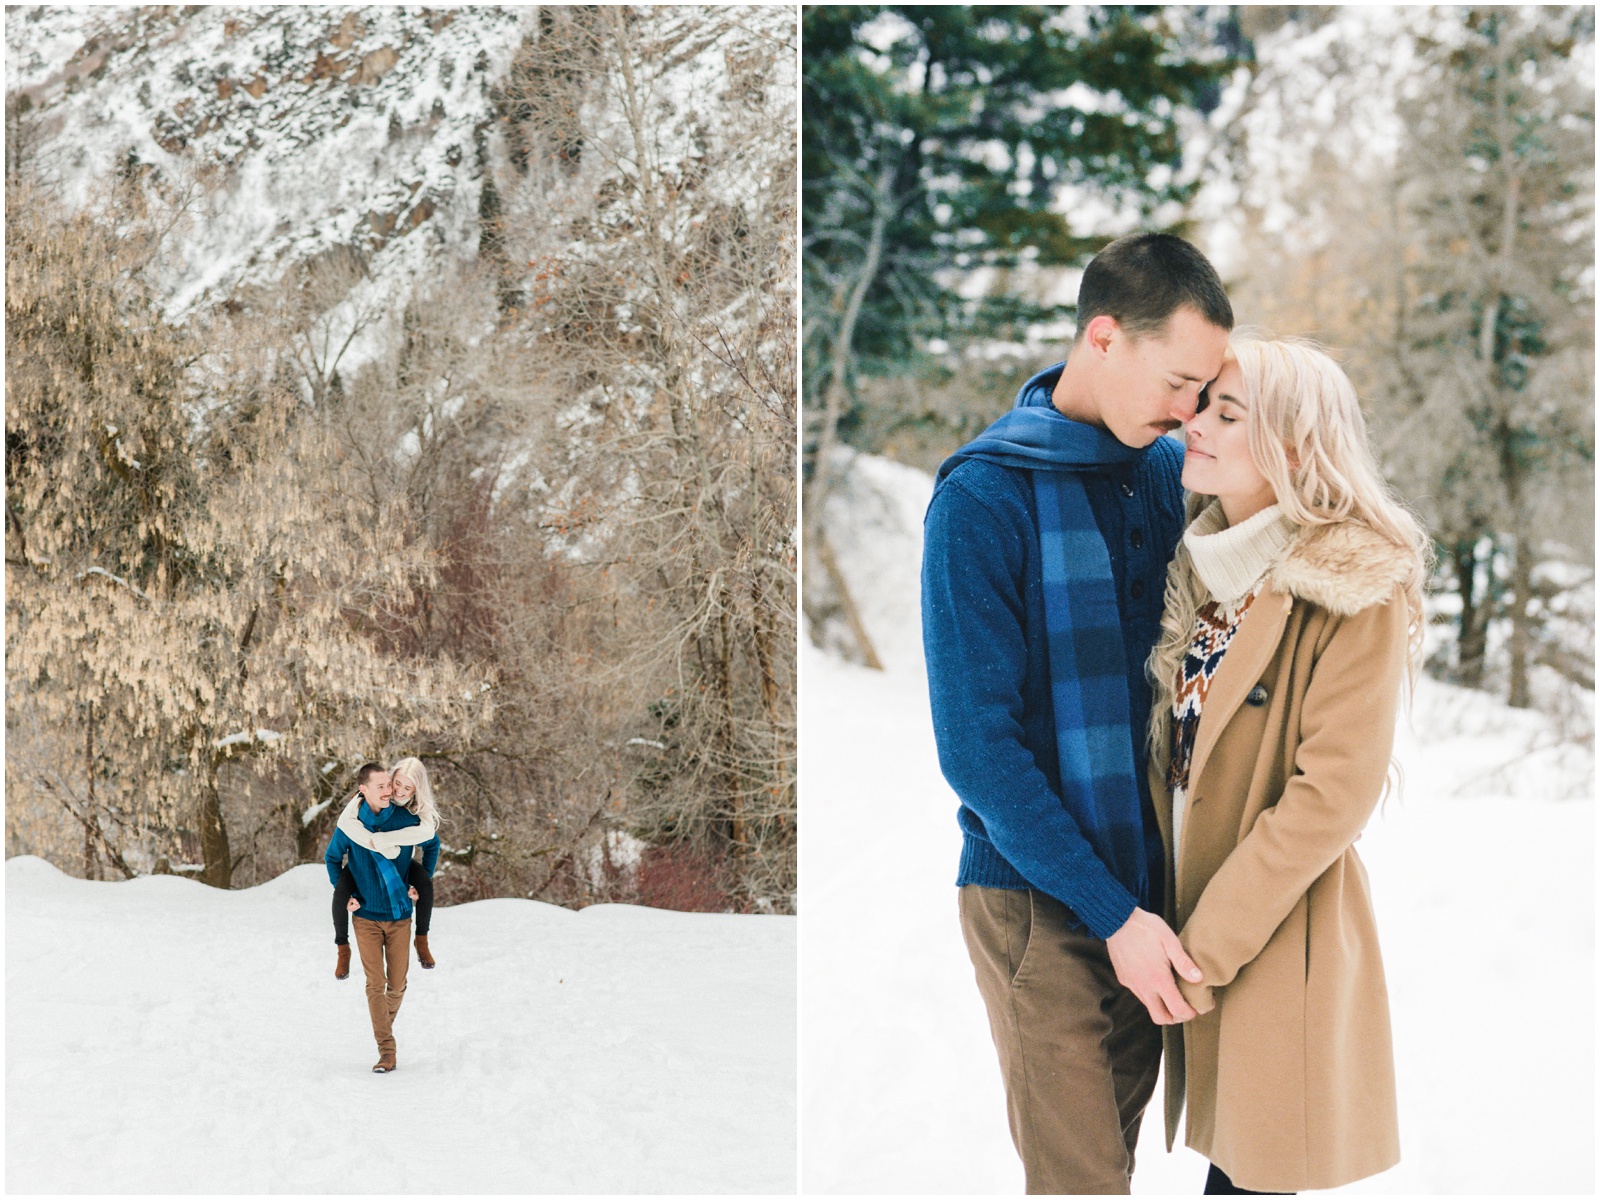 cute piggy back ride in the snow during engagement session